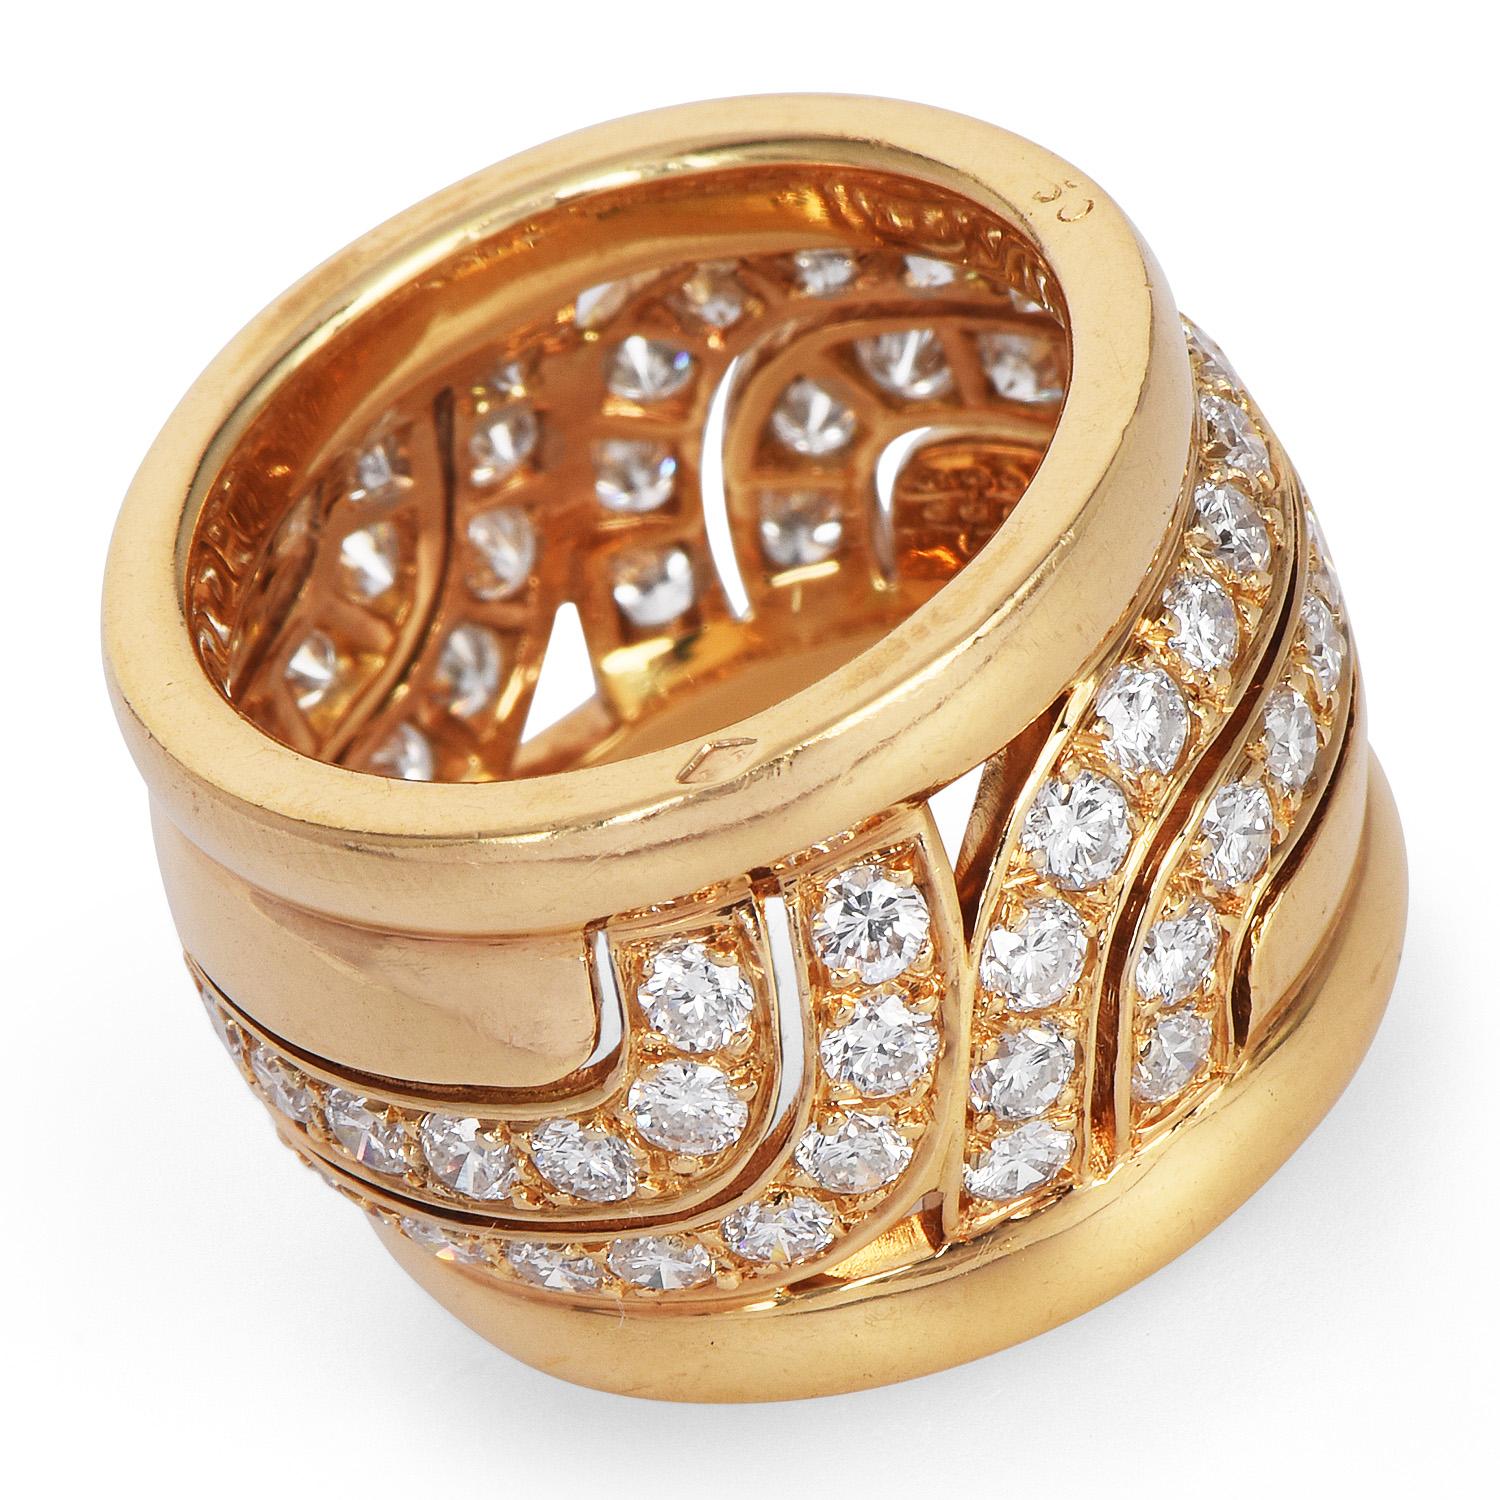 This Cartier Wide Band is inspired by the retro 1980s style, the ring is perfect for unisex wearing.

This French Cartier Ring is crafted in solid heavy 18K yellow gold, adorned with 64 round brilliant cut diamonds, VVS1 clarity, E-F  color total